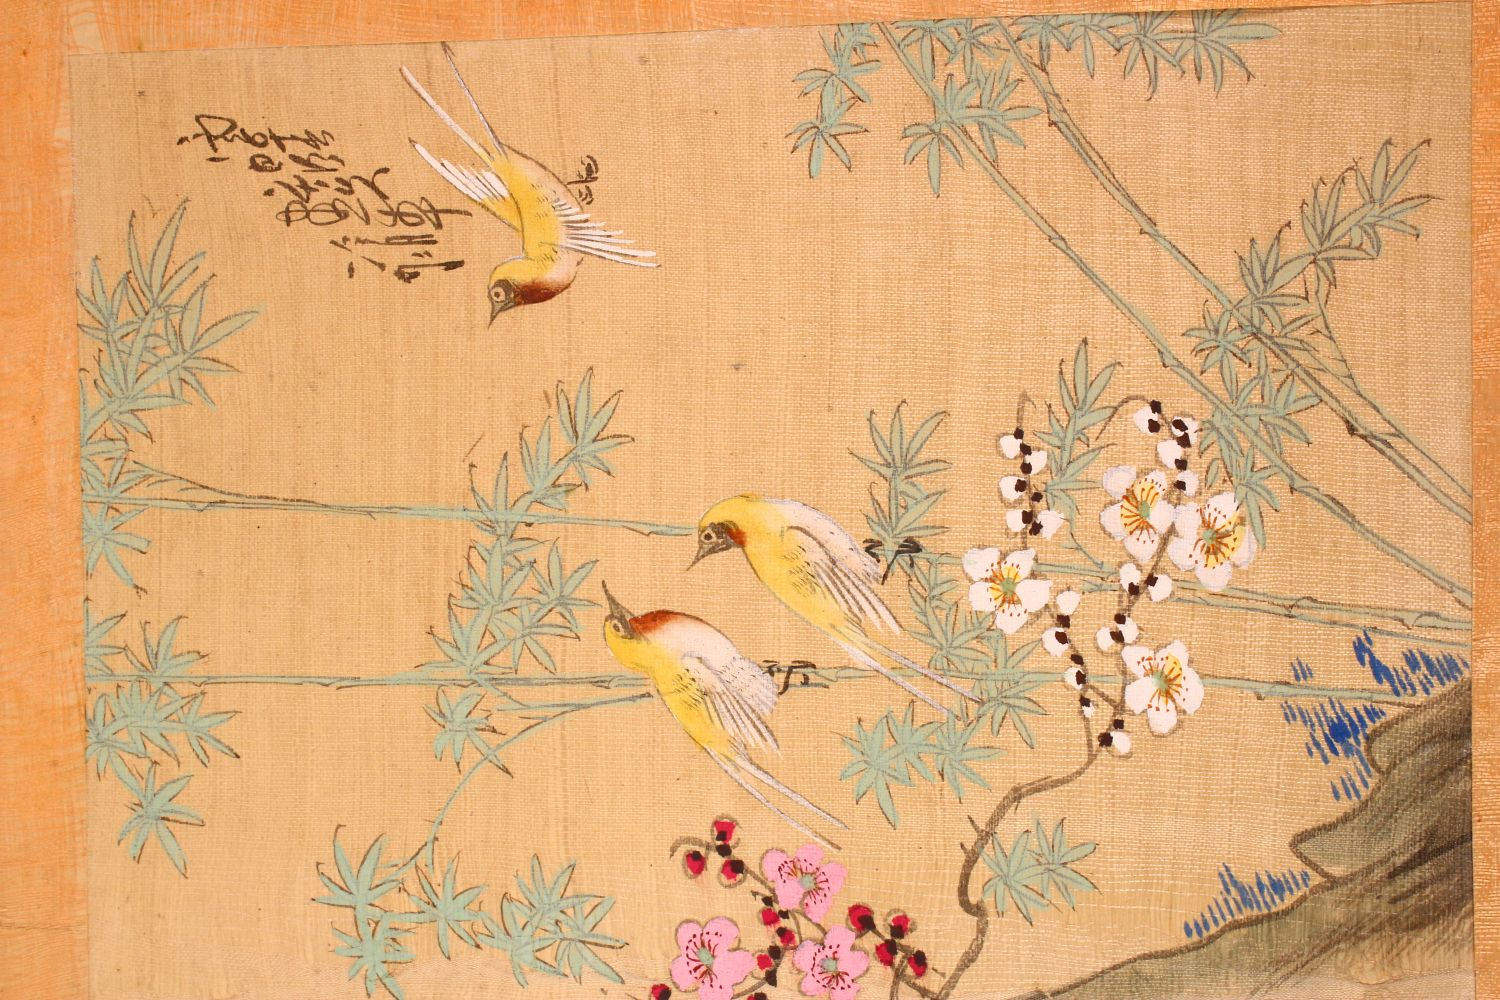 A COLLECTION OF FIVE CHINESE PAINTINGS ON PAPER, depicting scholars, birds, and a figure on a - Image 5 of 7